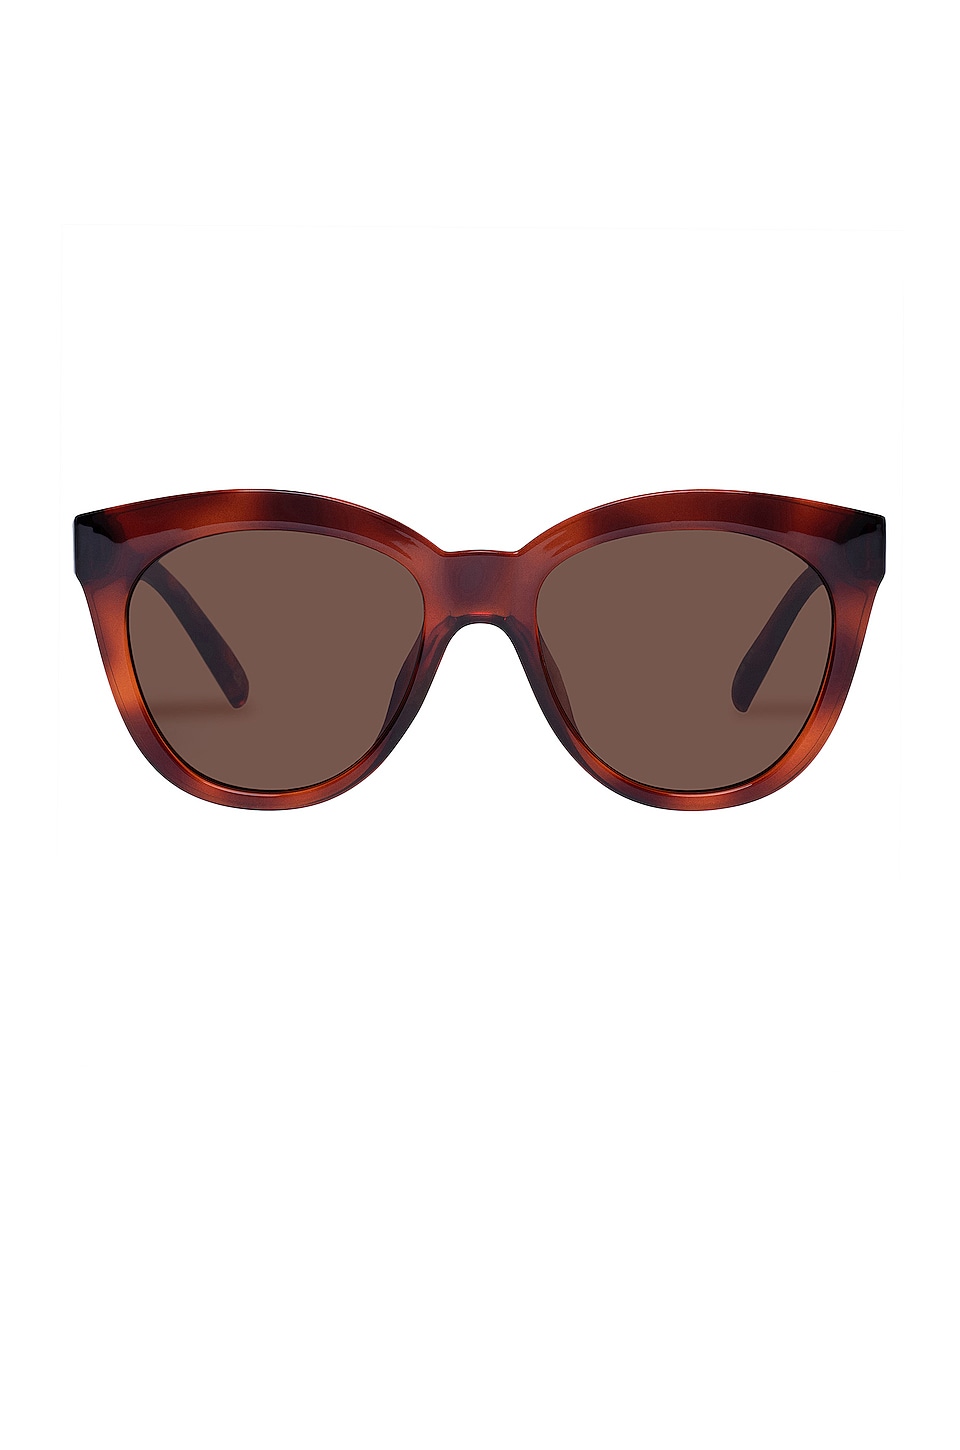 Le Specs Resumption Sunglasses in Toffee Tort | REVOLVE